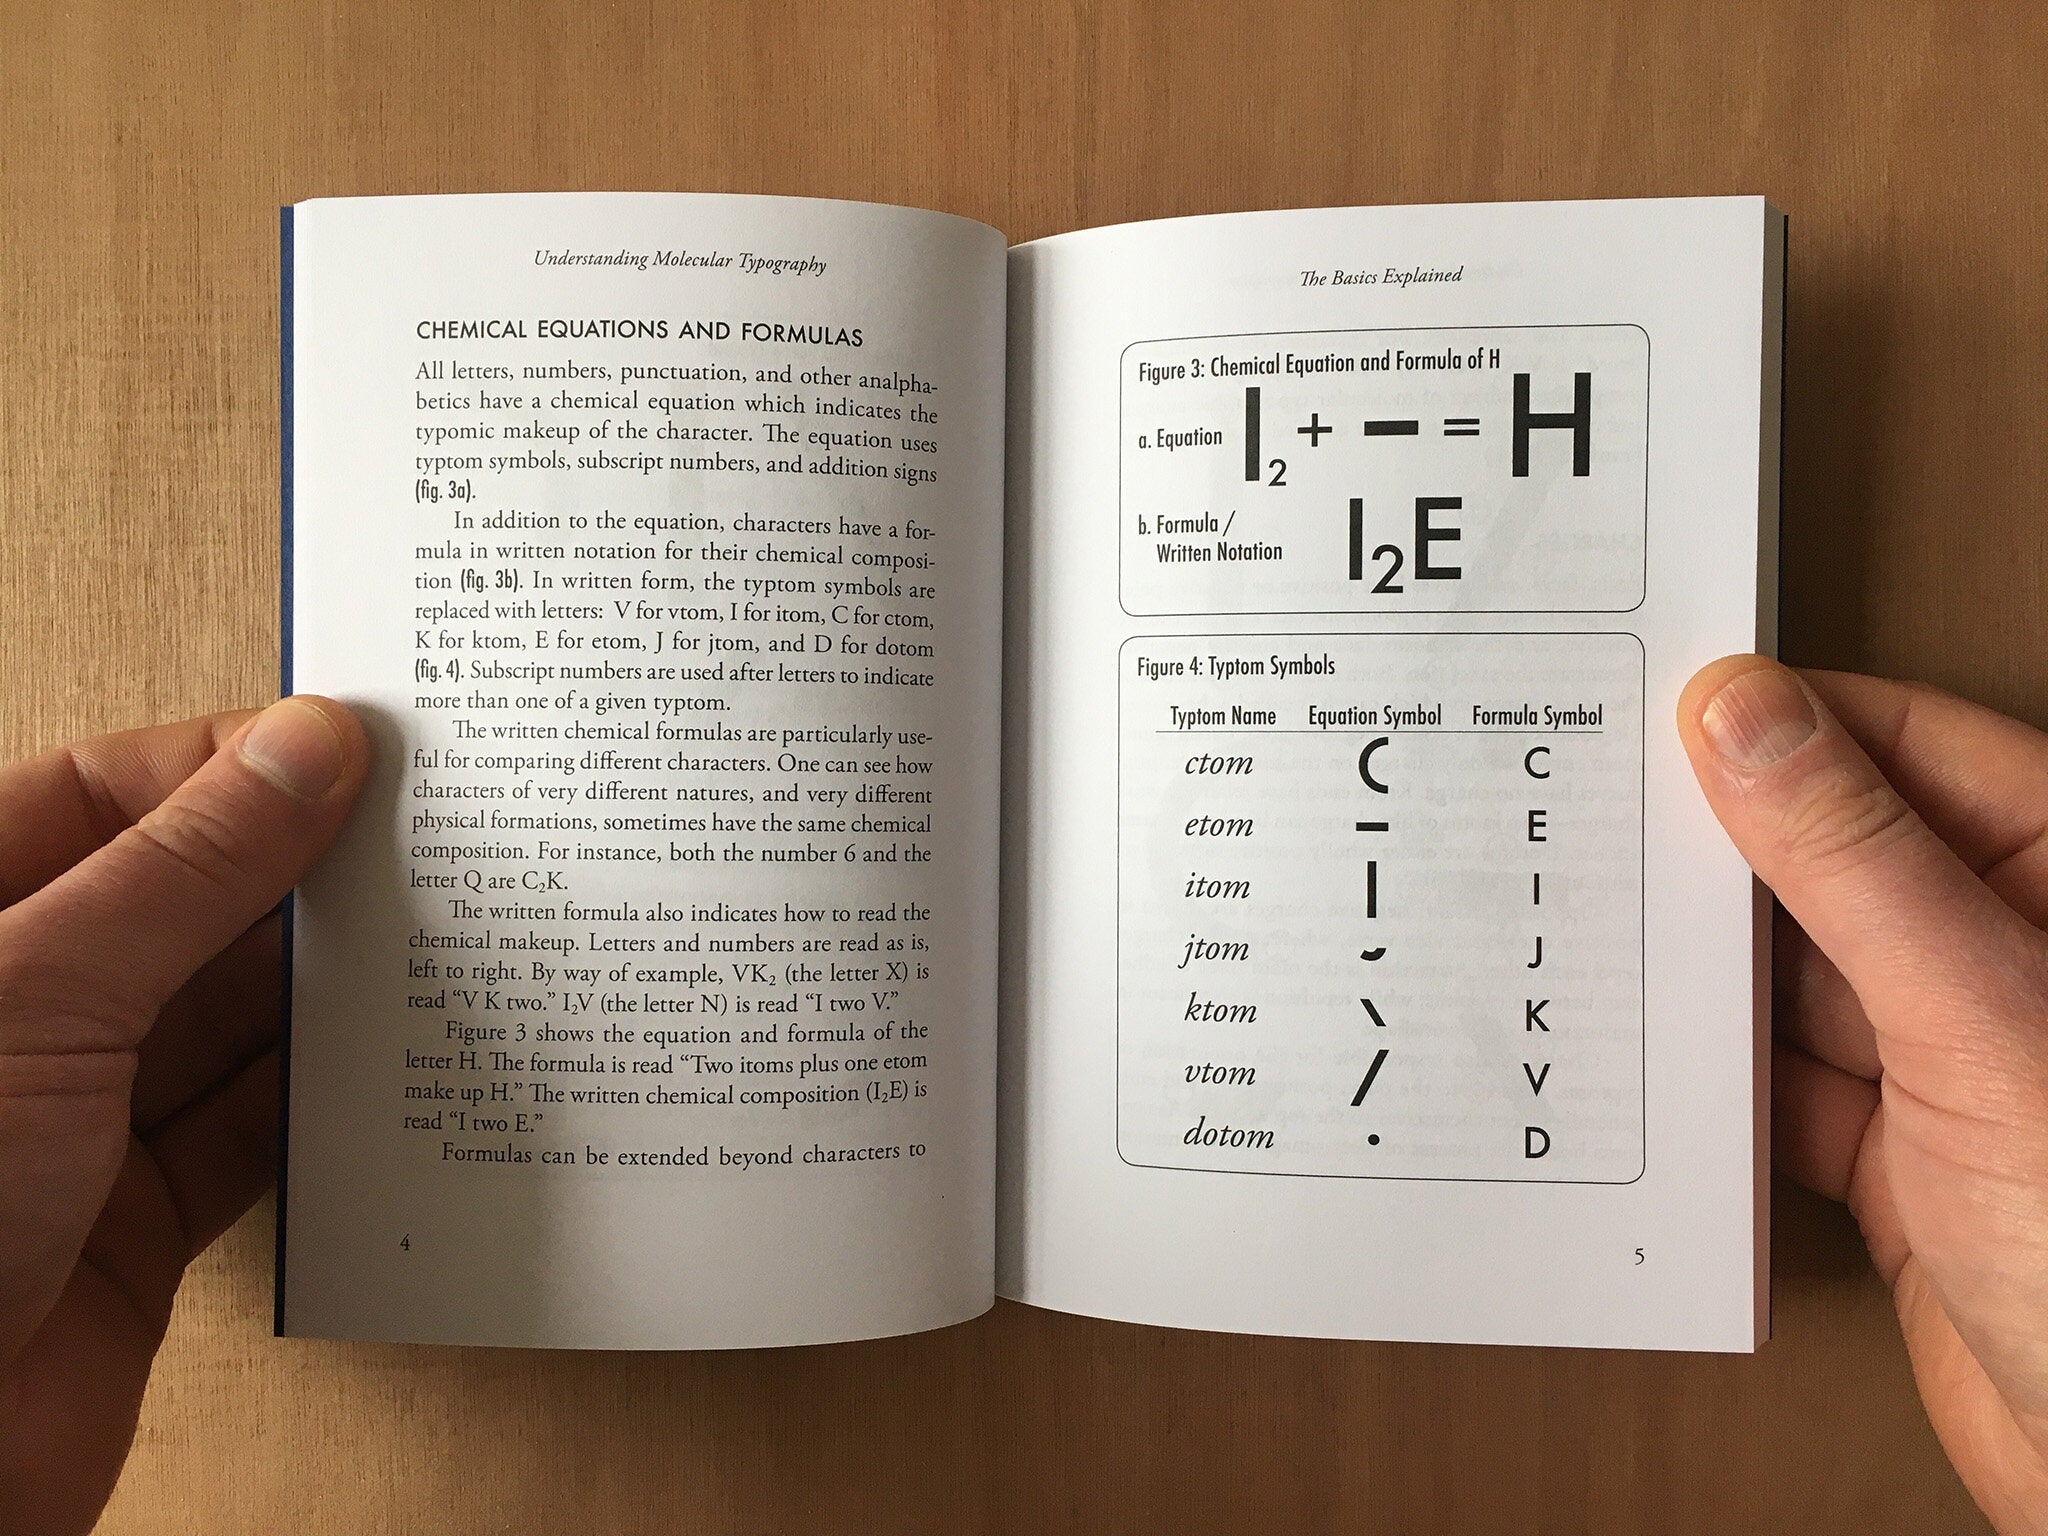 UNDERSTANDING MOLECULAR TYPOGRAPHY by Woody Leslie and H.F. Henderson